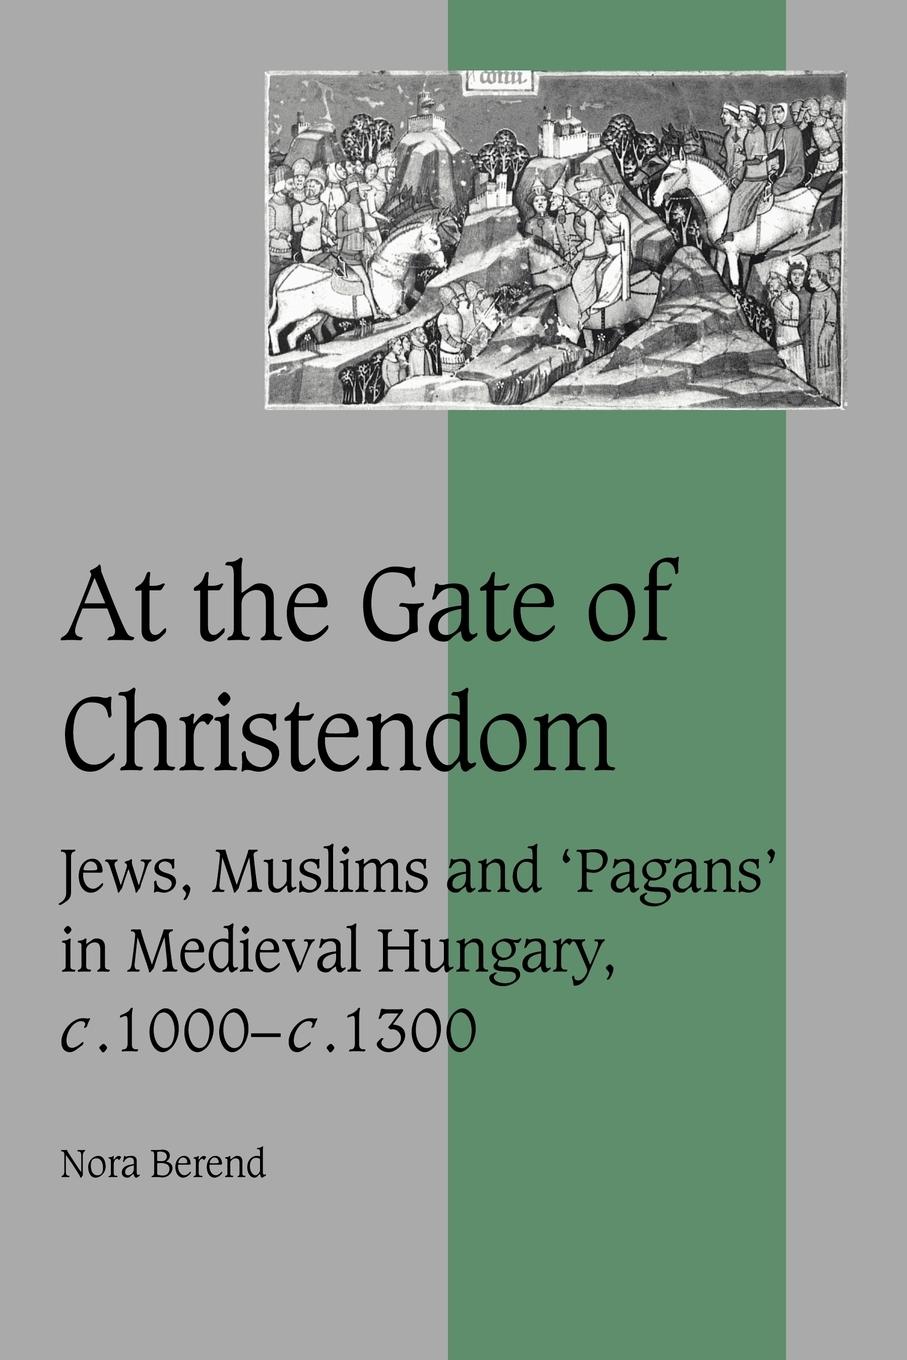 At the Gate of Christendom - Berend, Nora|Nora, Berend